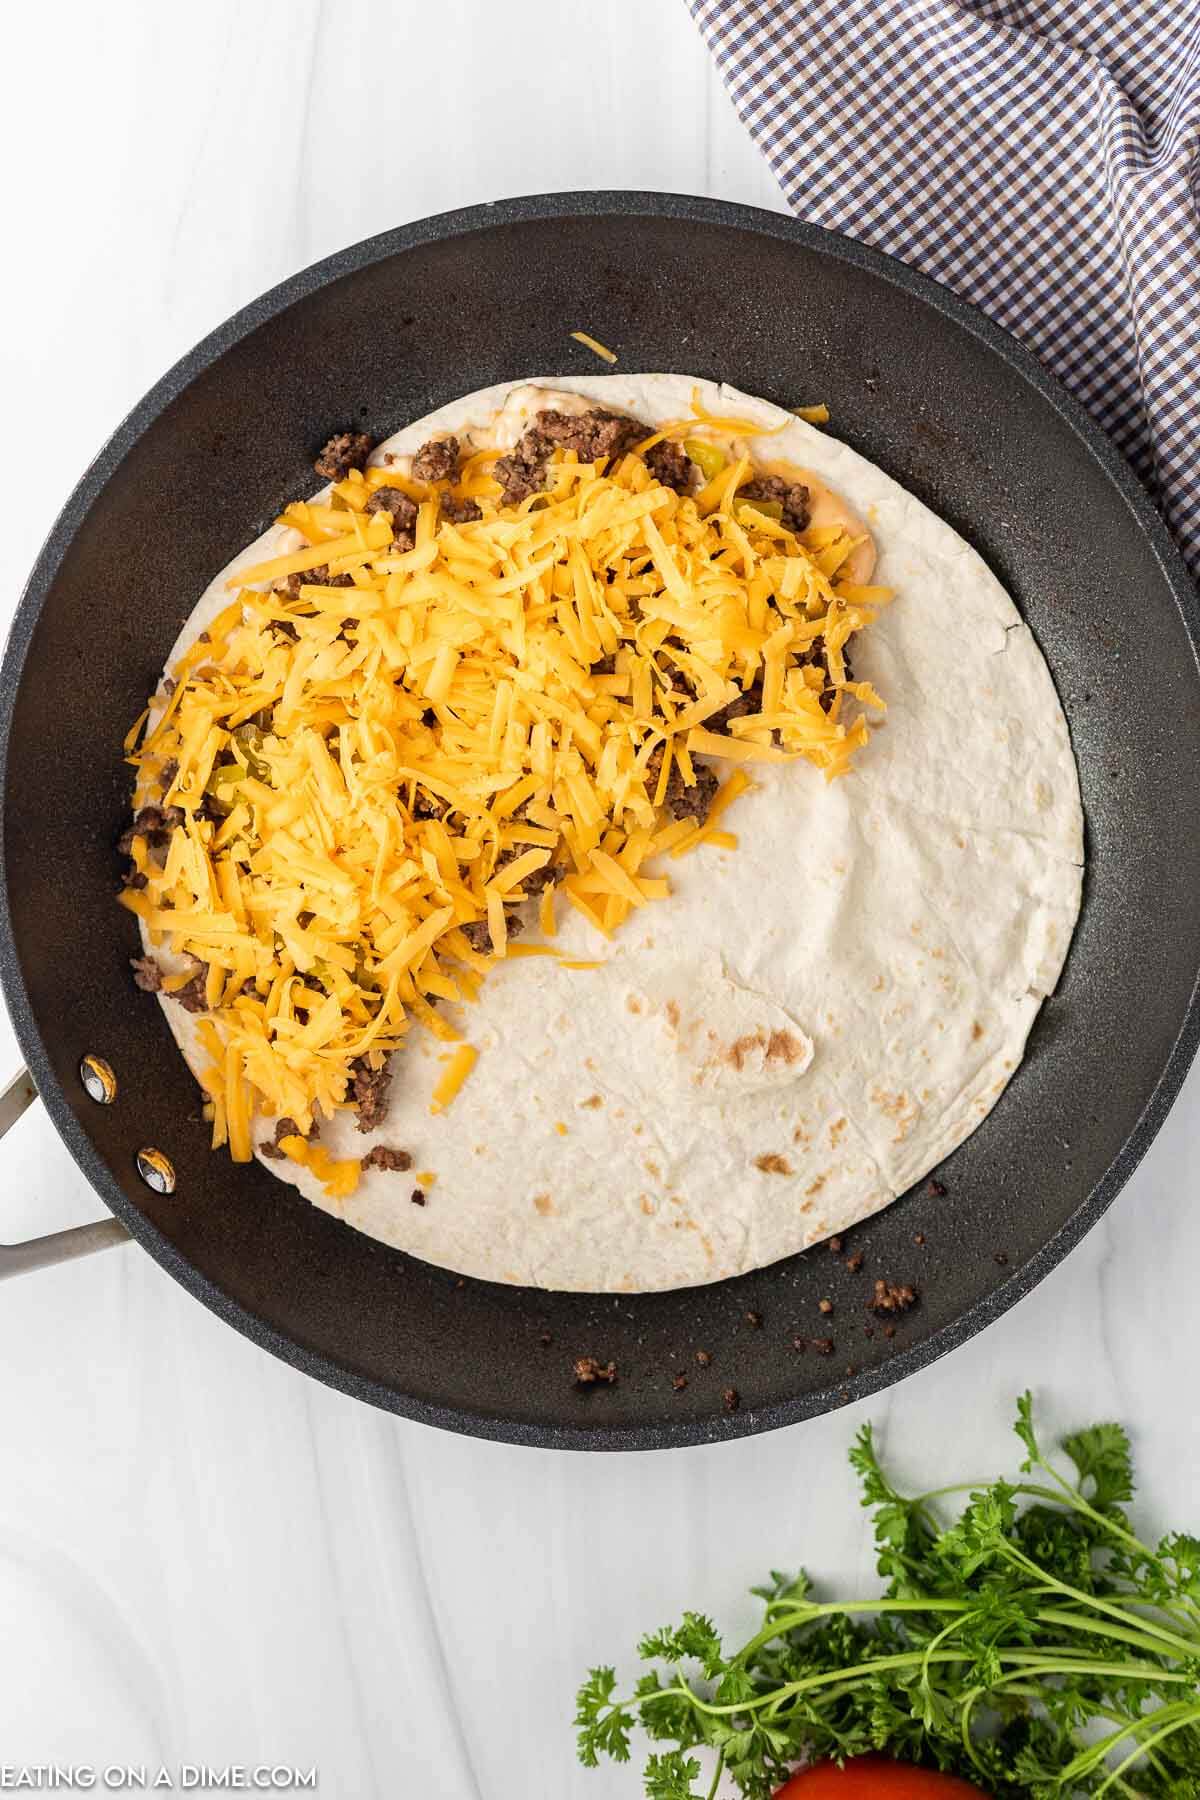 Topping the tortilla with beef, cheese and sauce